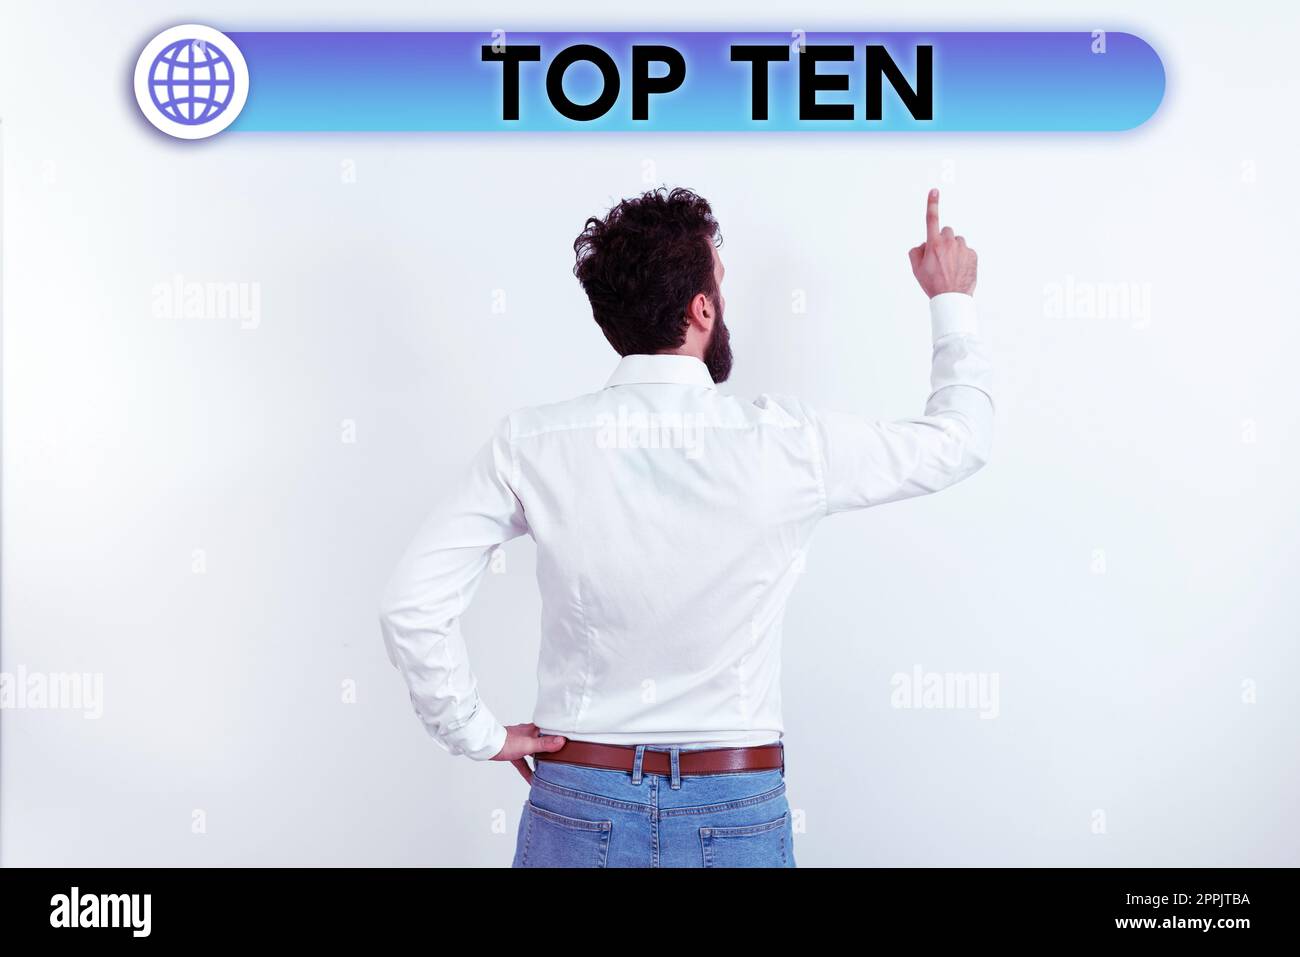 Text caption presenting Top Ten. Business idea the ten most popular songs or recordings in the popular music charts Stock Photo